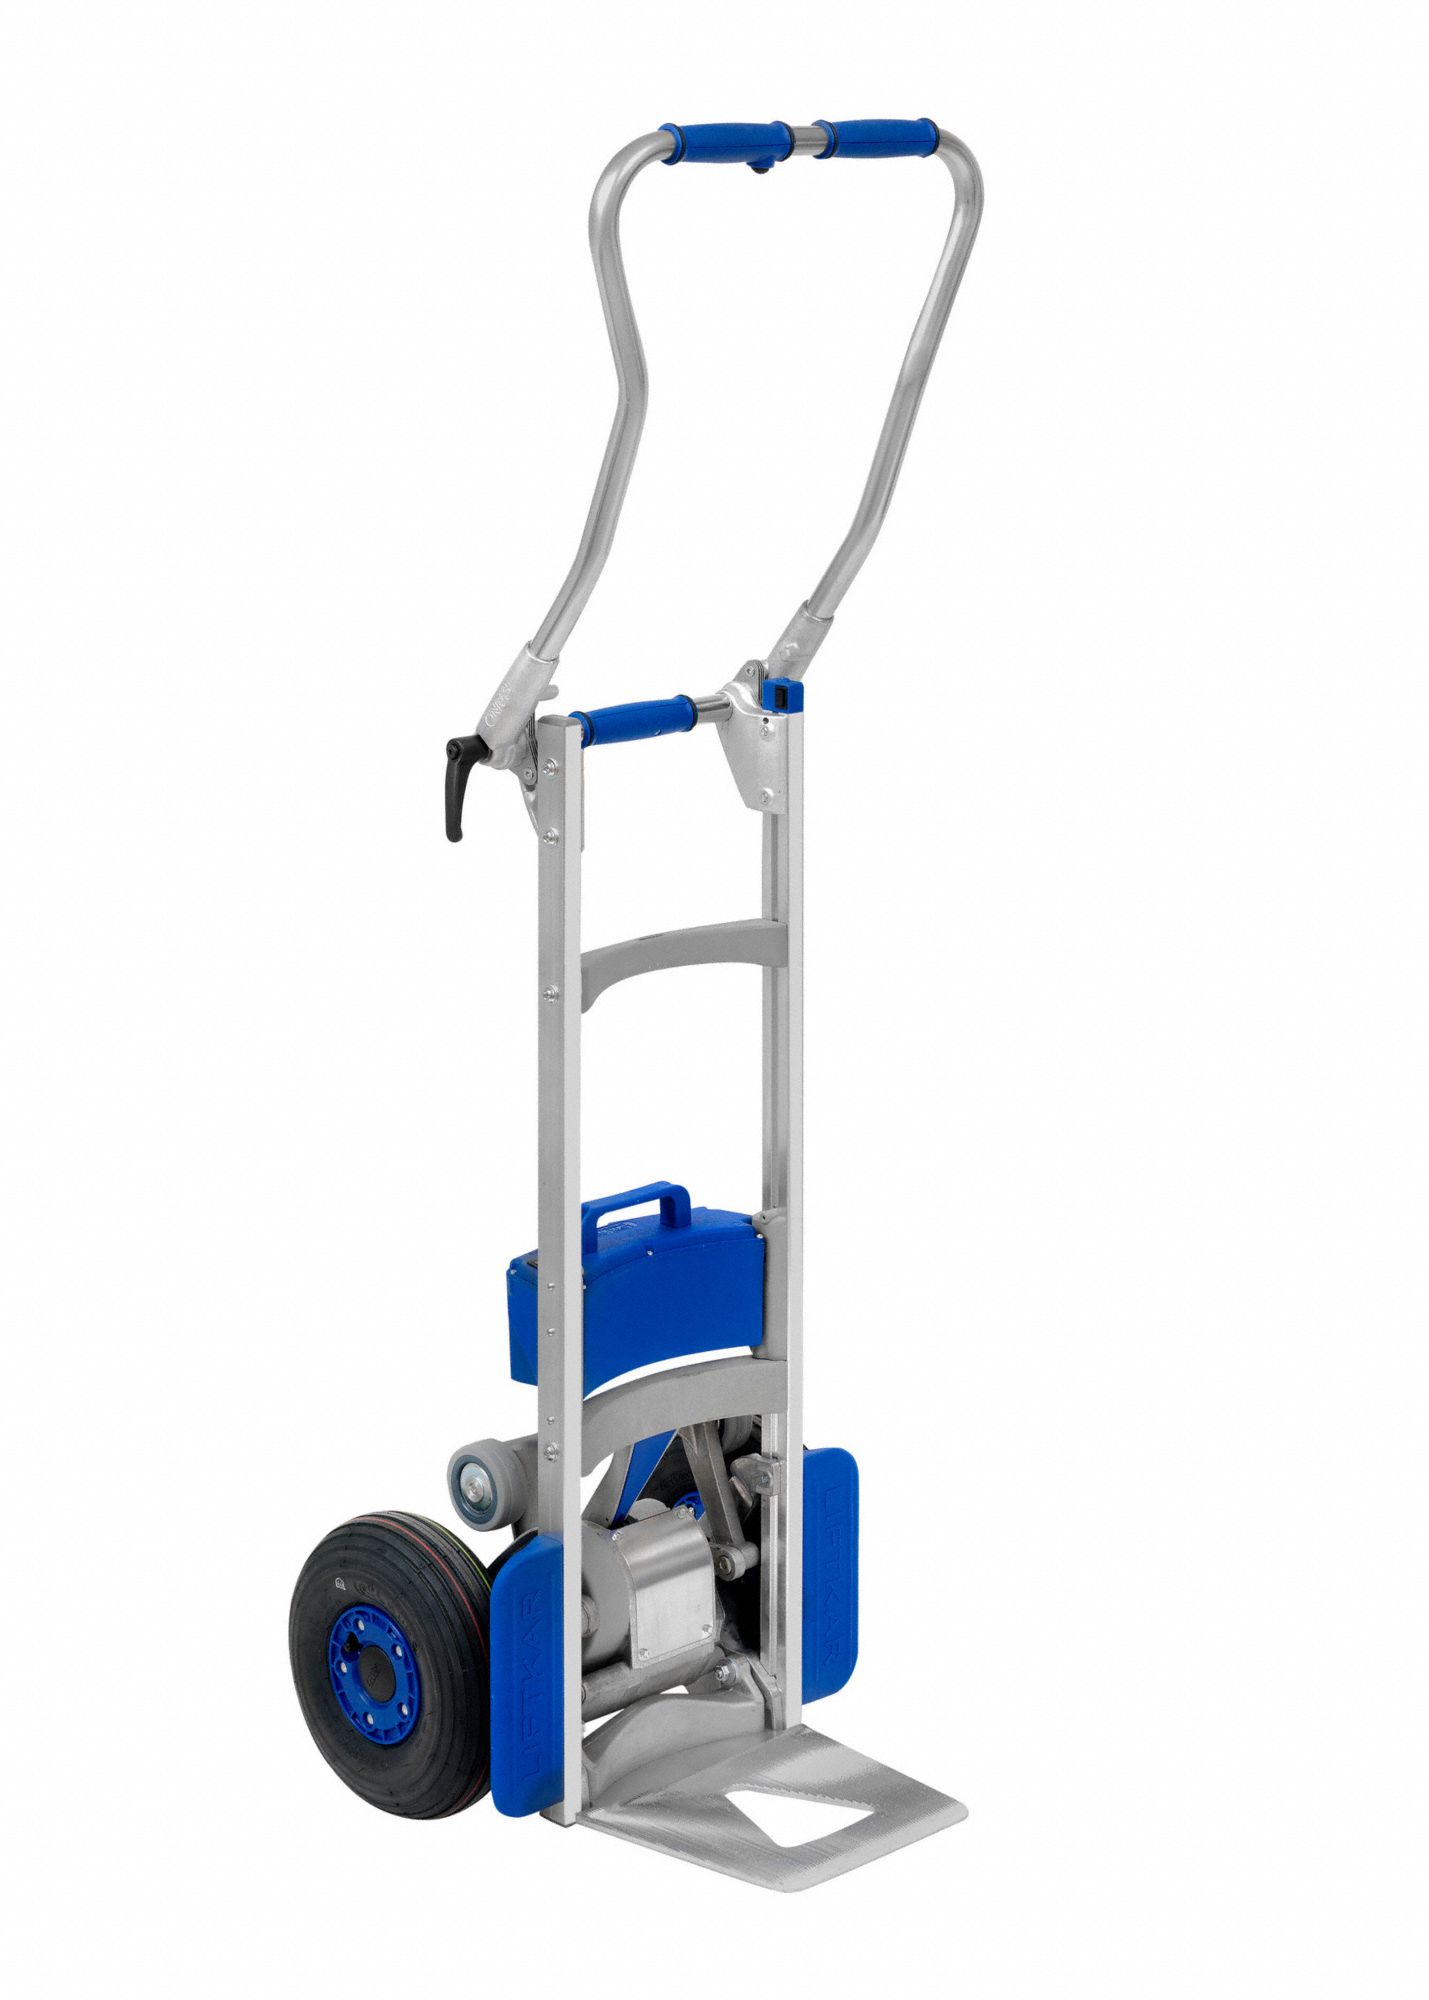 Stair Climbing Hand Truck: 300 lb Load Capacity, 16.5 in x 13.4 in, 61 in x 18 in 24 in